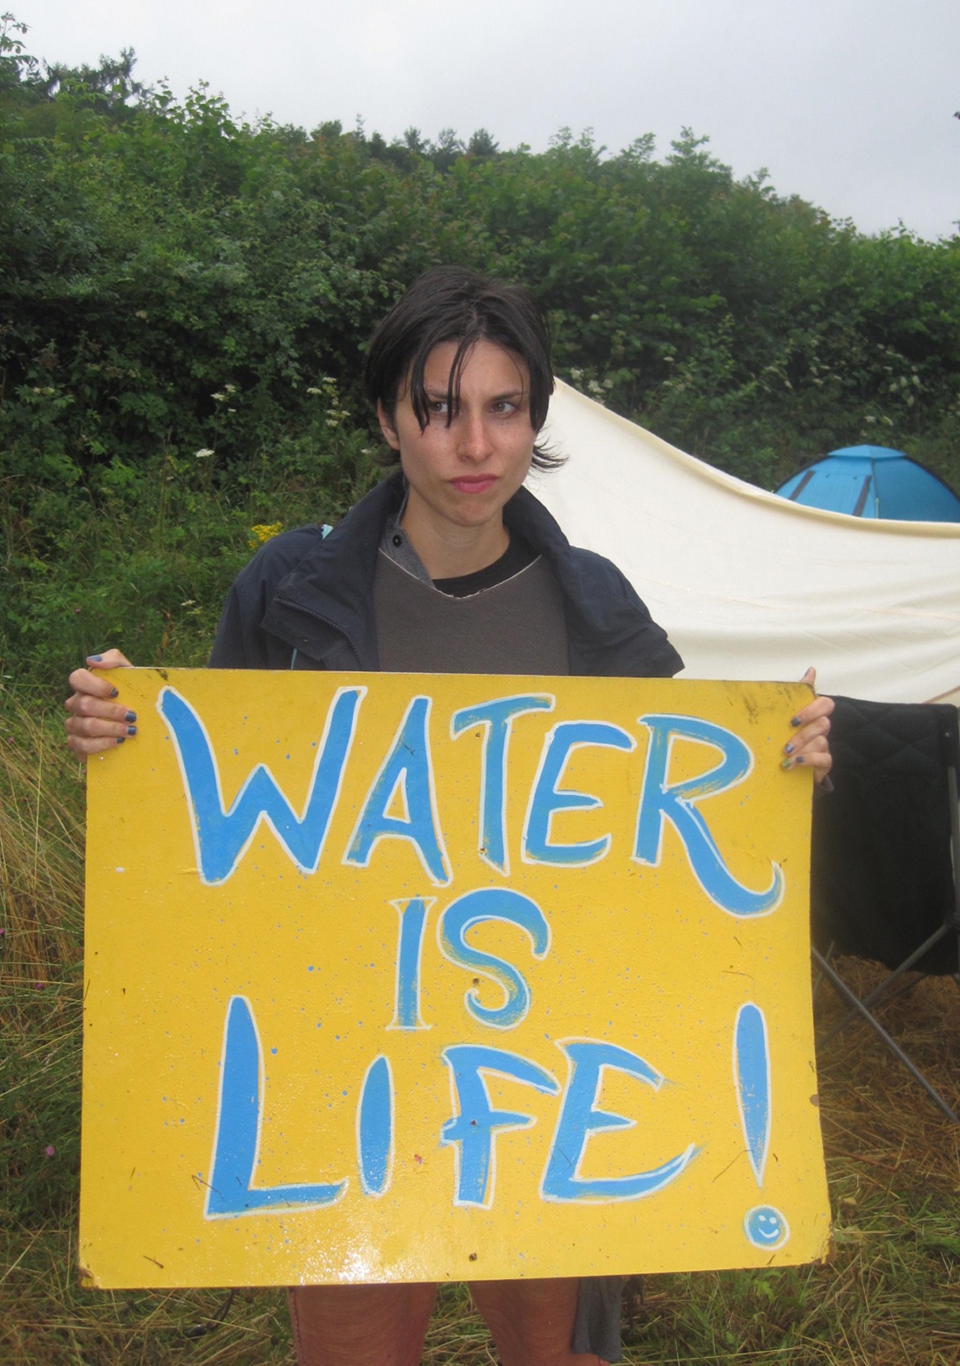 Activist Natalie Hynde, the daughter of The Kinks' Ray Davies and singer Chrissie Hynde, at the Balcombe protest.